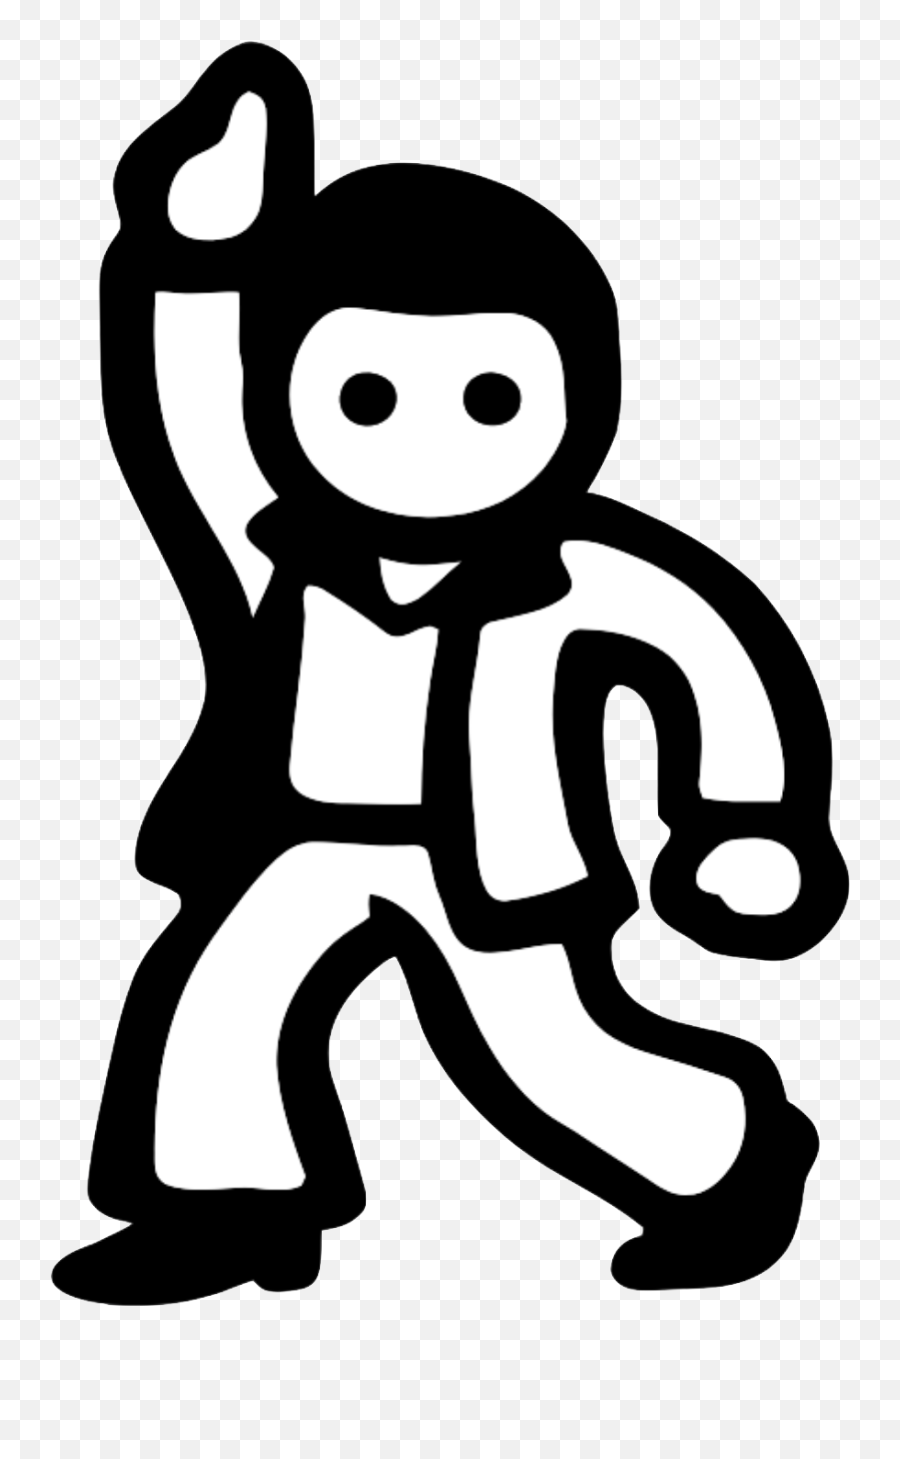 Water Emoji Png - The Most Notable Instance Of This Is With Dancing Emoji Drawing Easy,Water Emoji Png